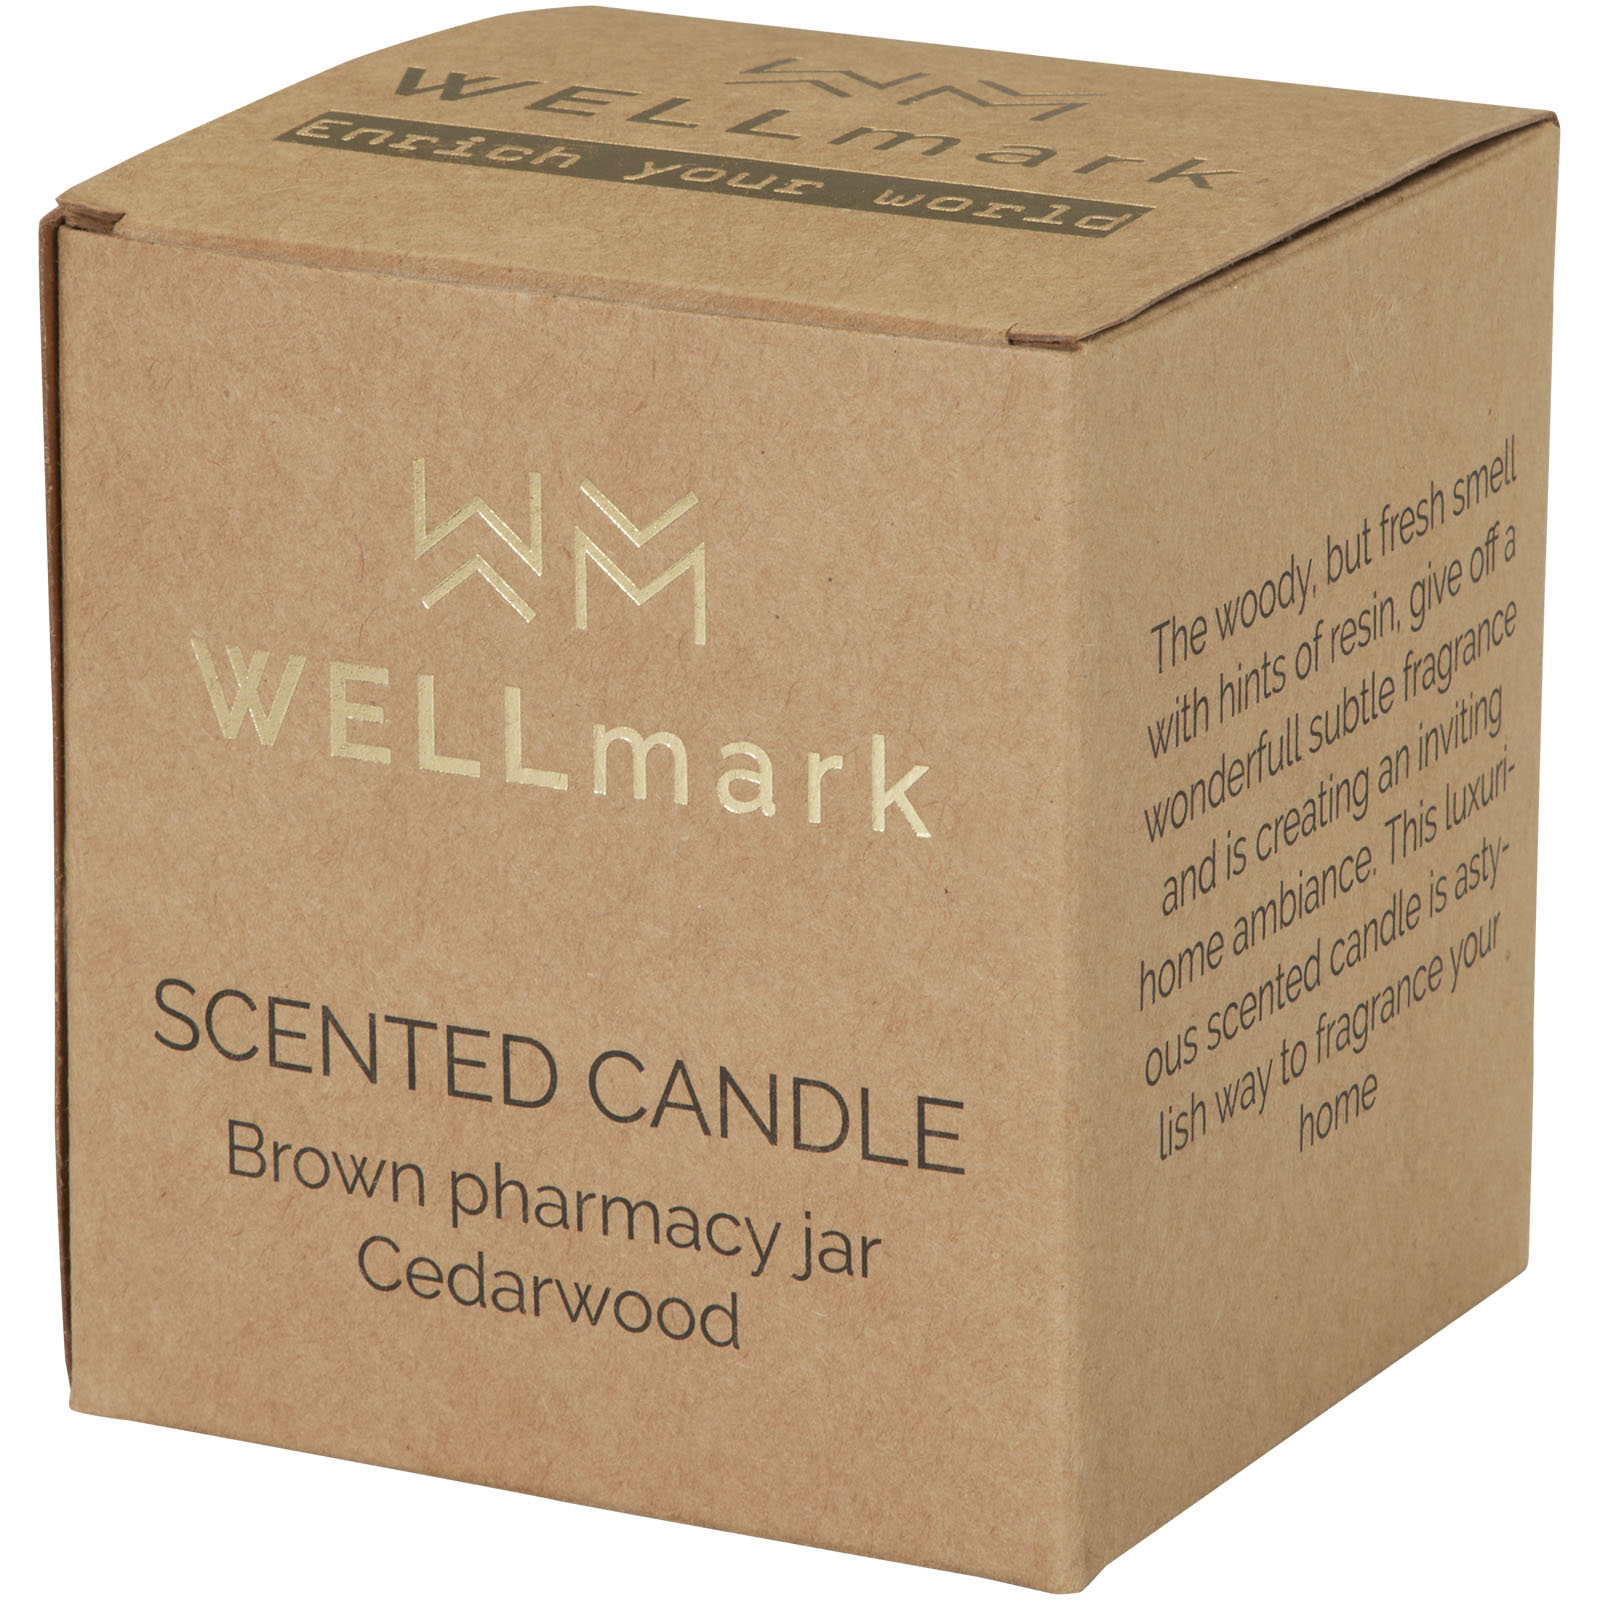 Advertising Personal Care - Wellmark Let's Get Cozy 650 g scented candle - cedar wood fragrance - 1